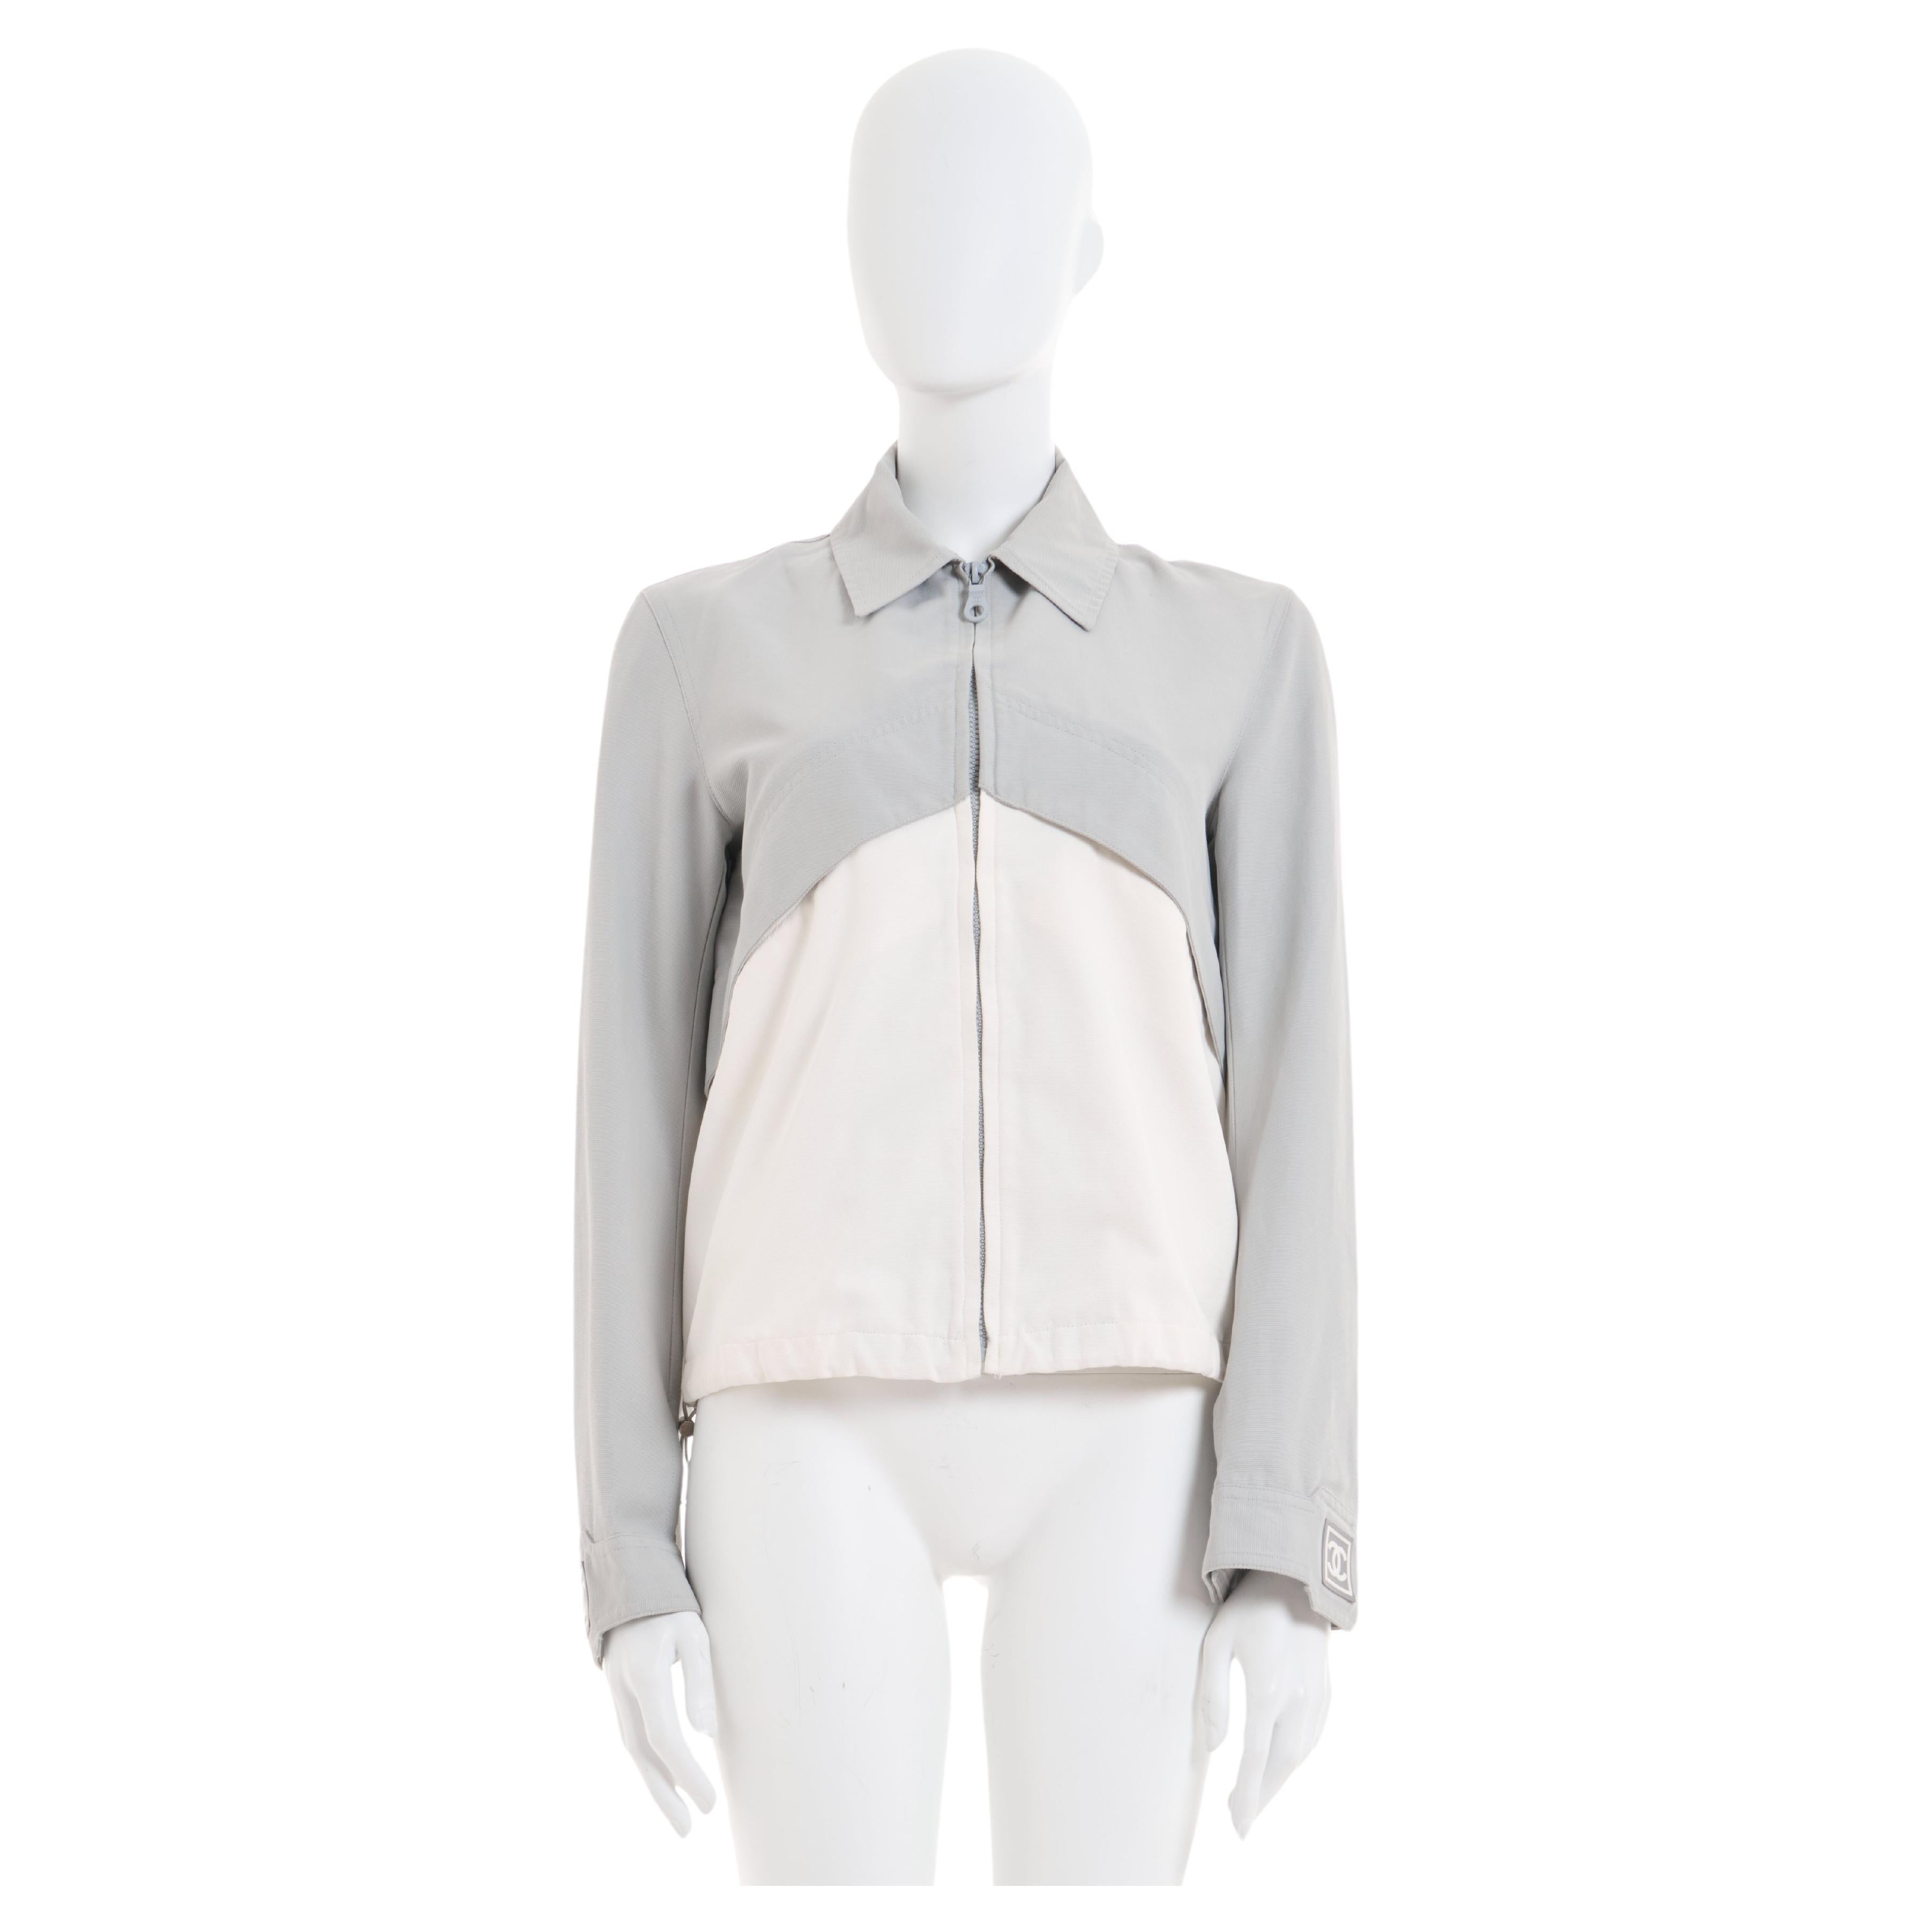 Chanel by Karl Lagerfeld F/W 2001 Dove gray and white zip-up sport jacket  For Sale